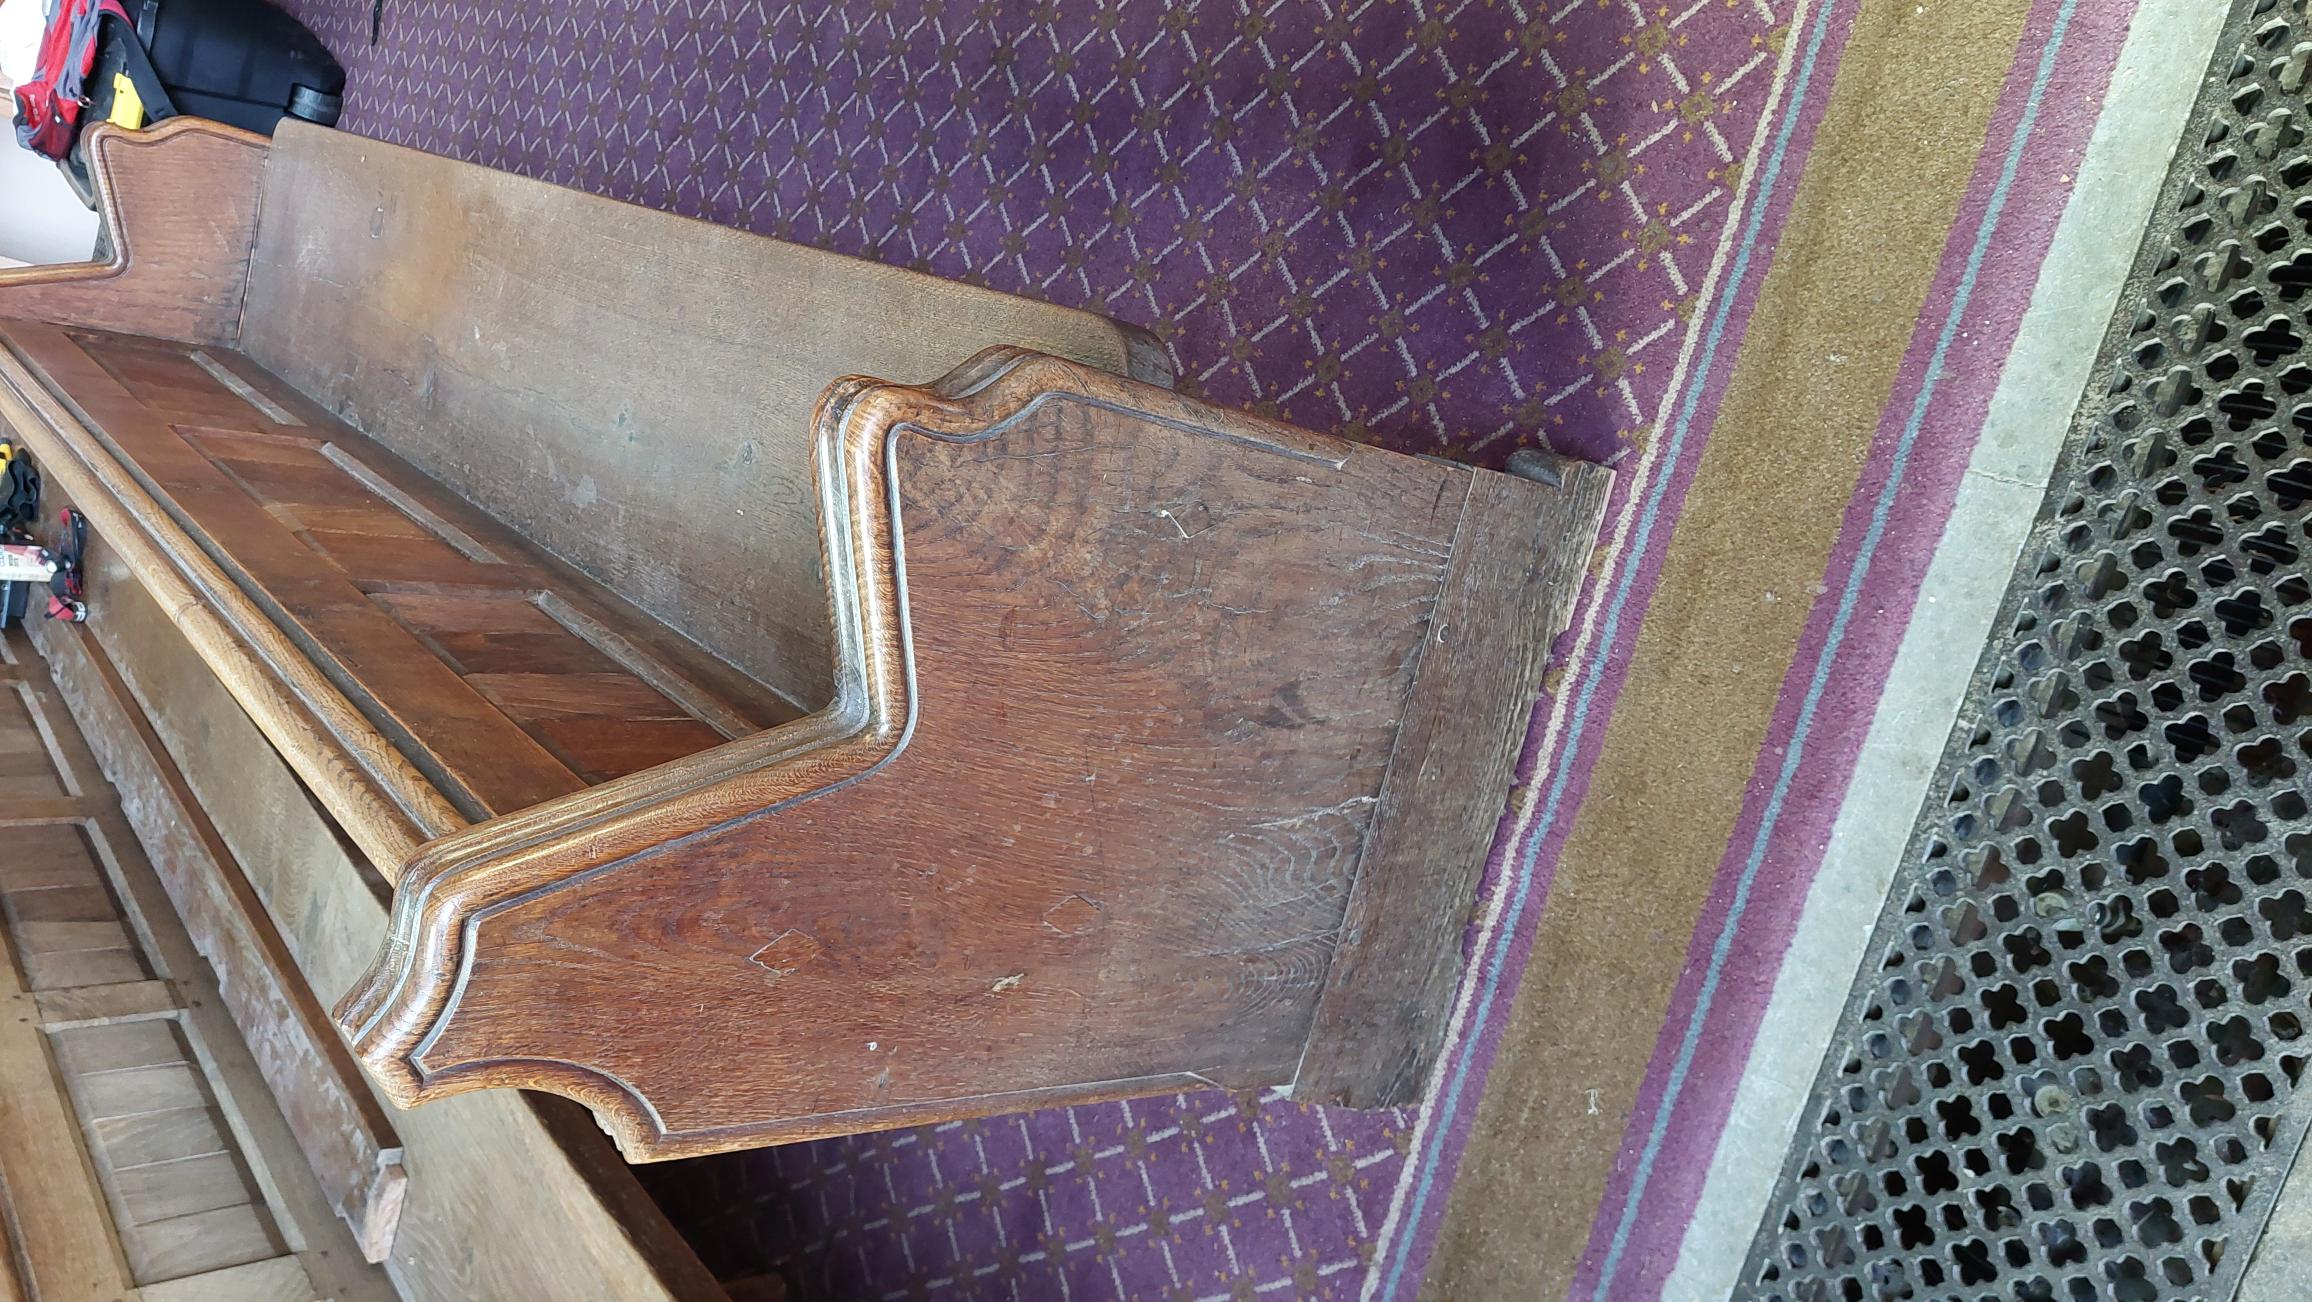 Photographs of finished cut down pew